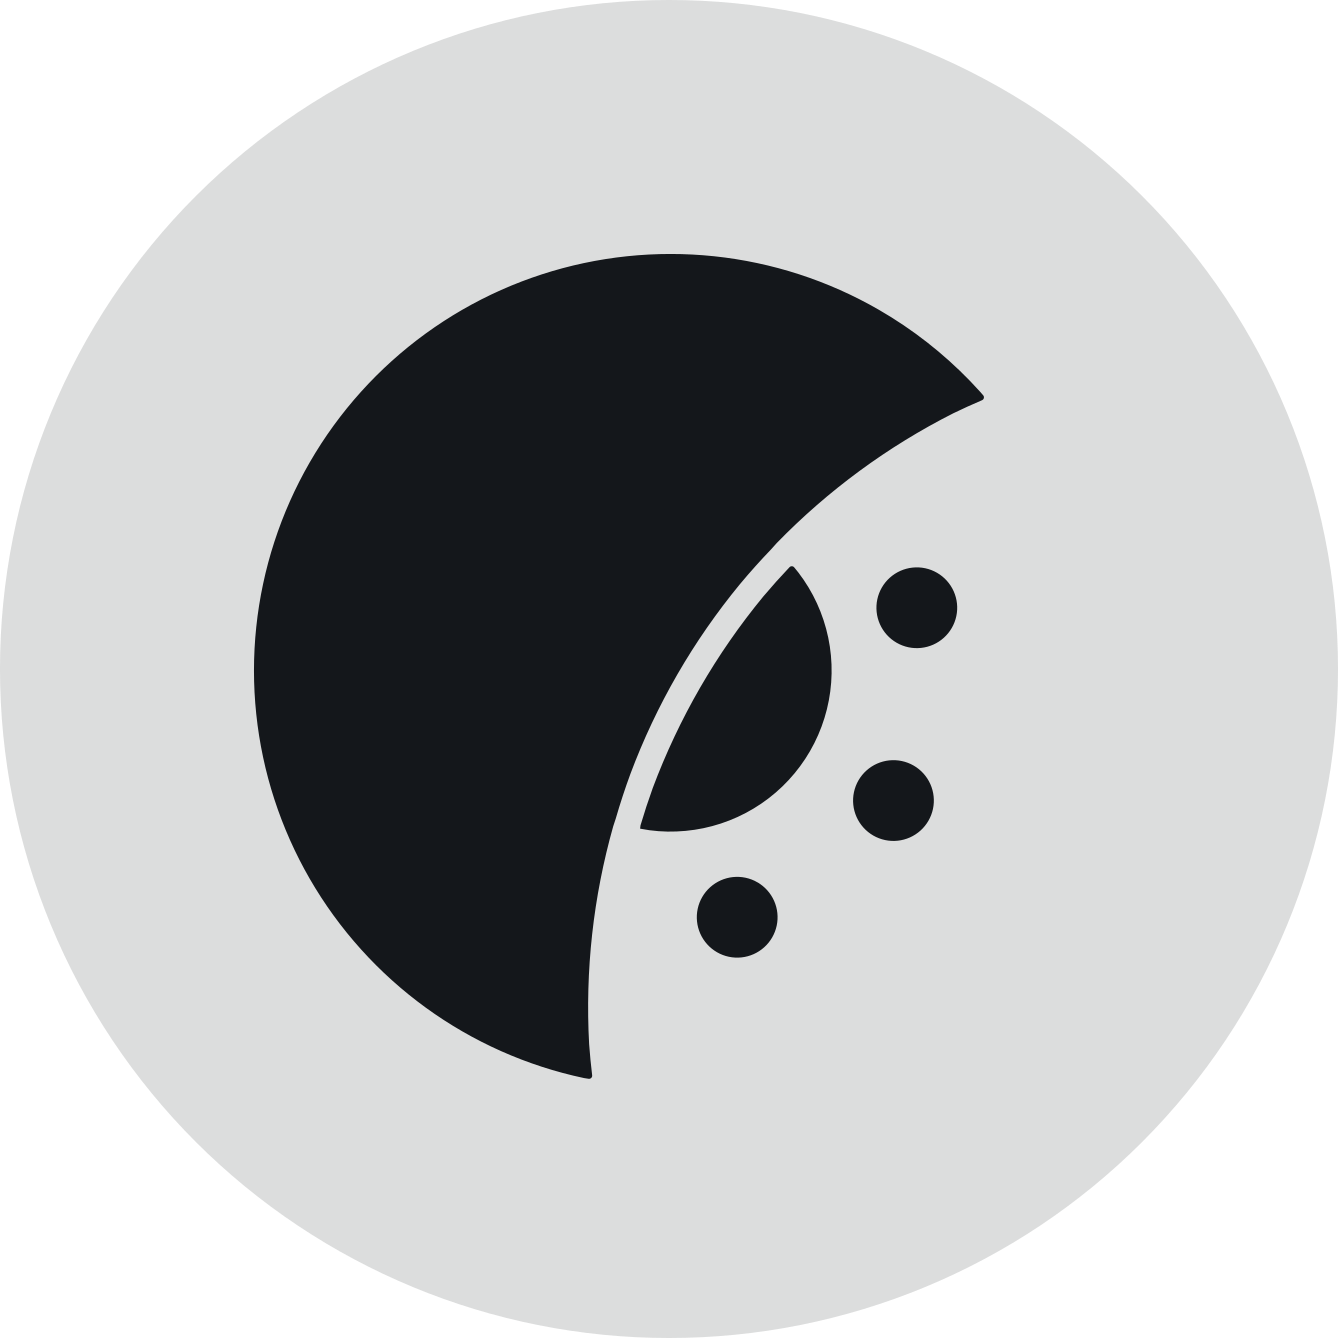 The Perpetua logo, a waning crescent flipped across the x-axis, with half a sun on the inside